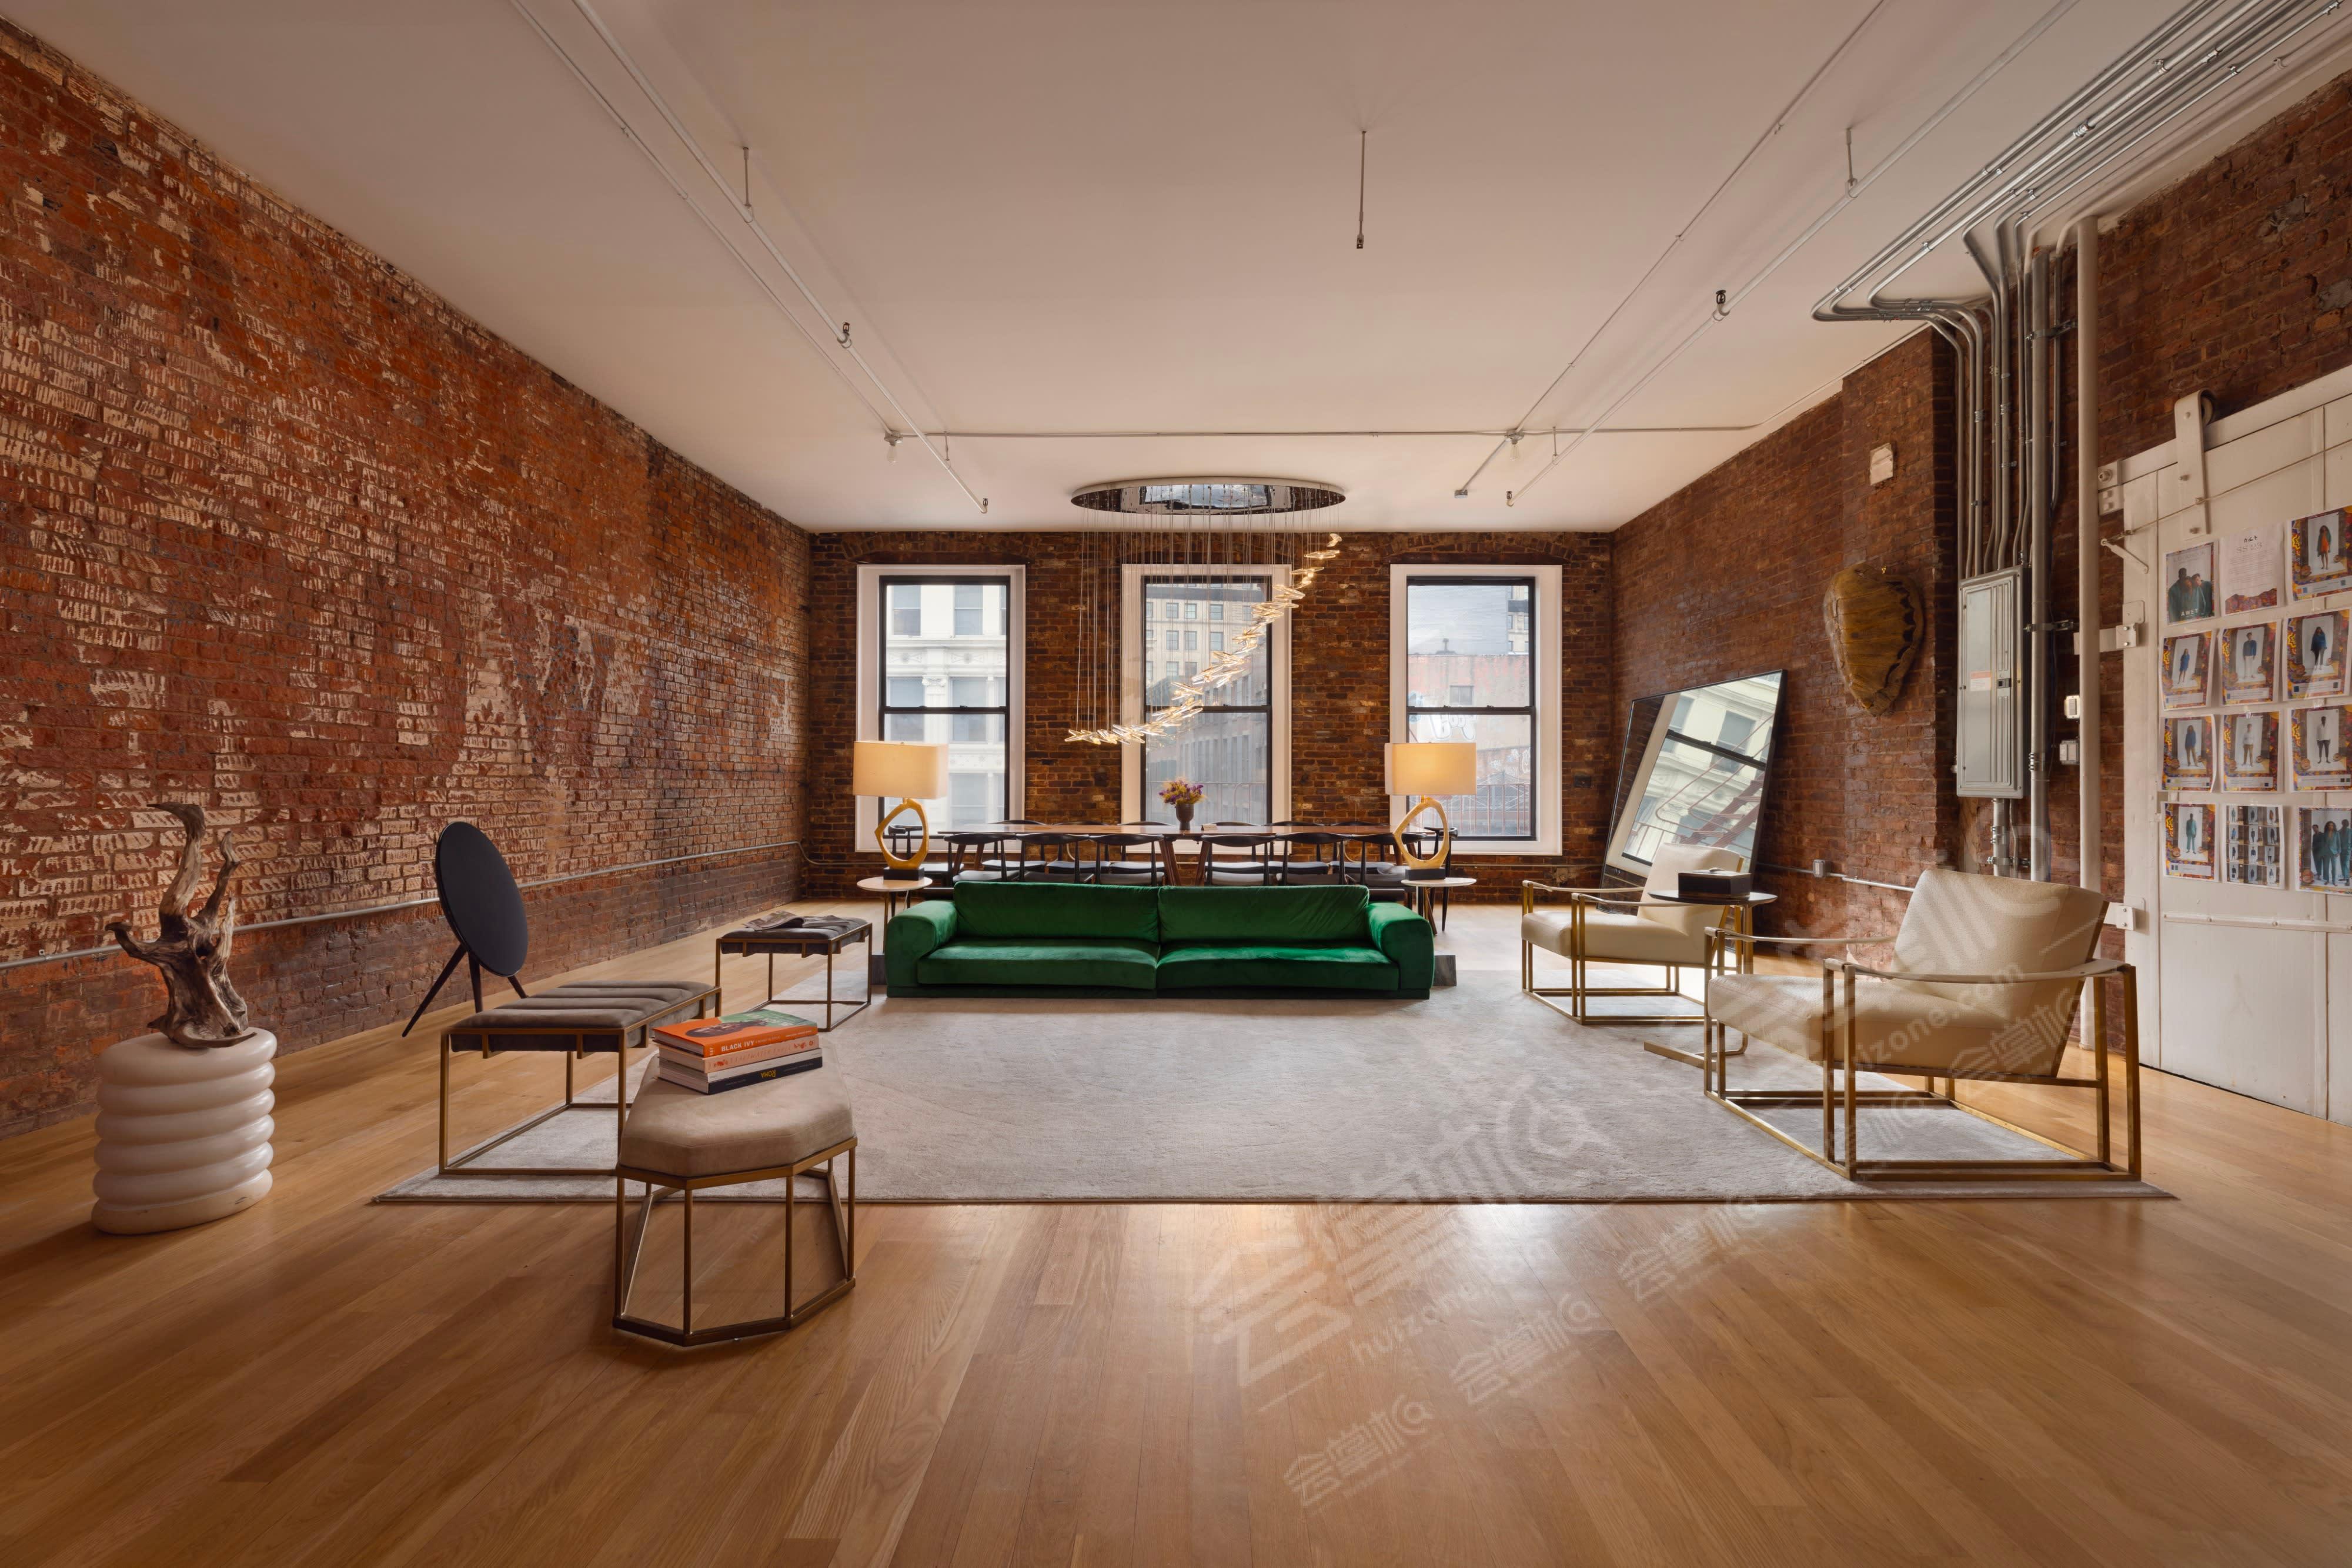 Chic, Old School Soho Loft with Natural Light, Made for Instagram, E-Commerce & Creatives